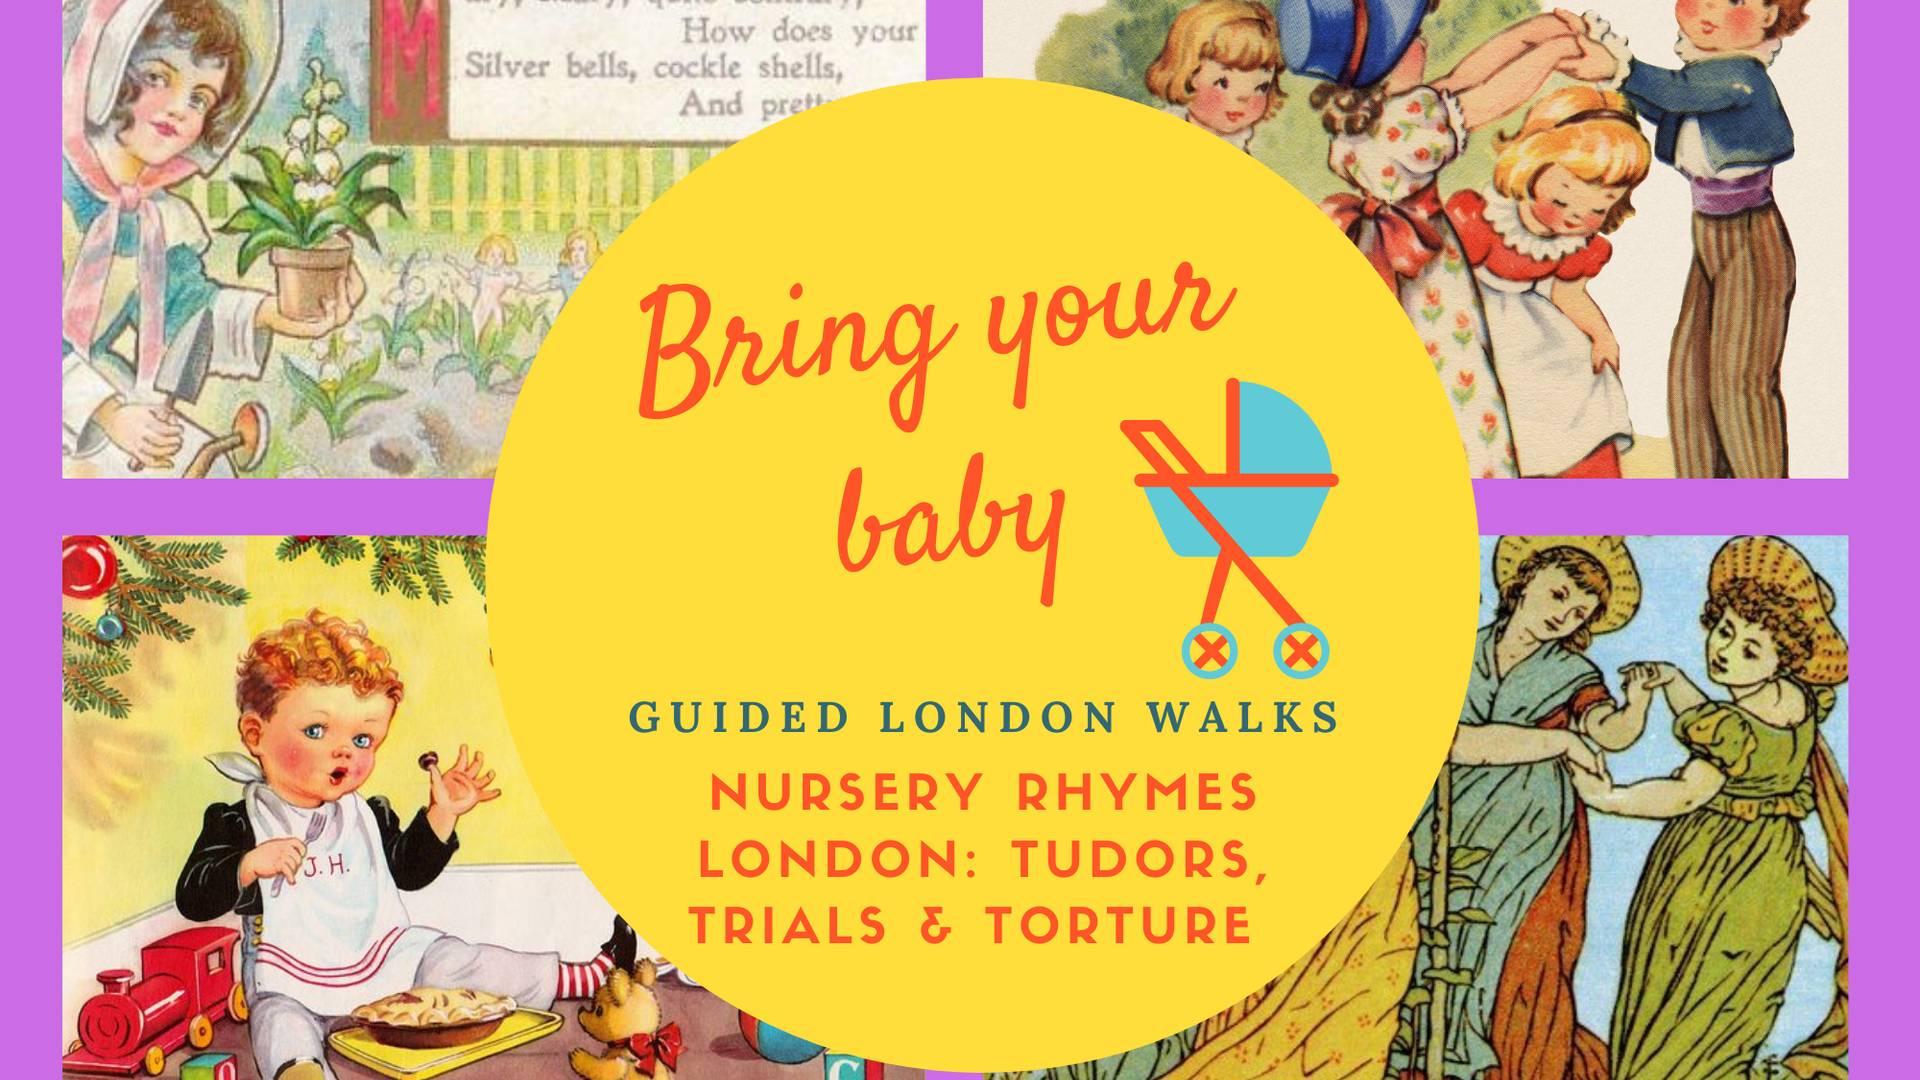 Bring Your Baby Guided London Walk: "Nursery Rhymes London: Tudors, Trials & Torture" photo